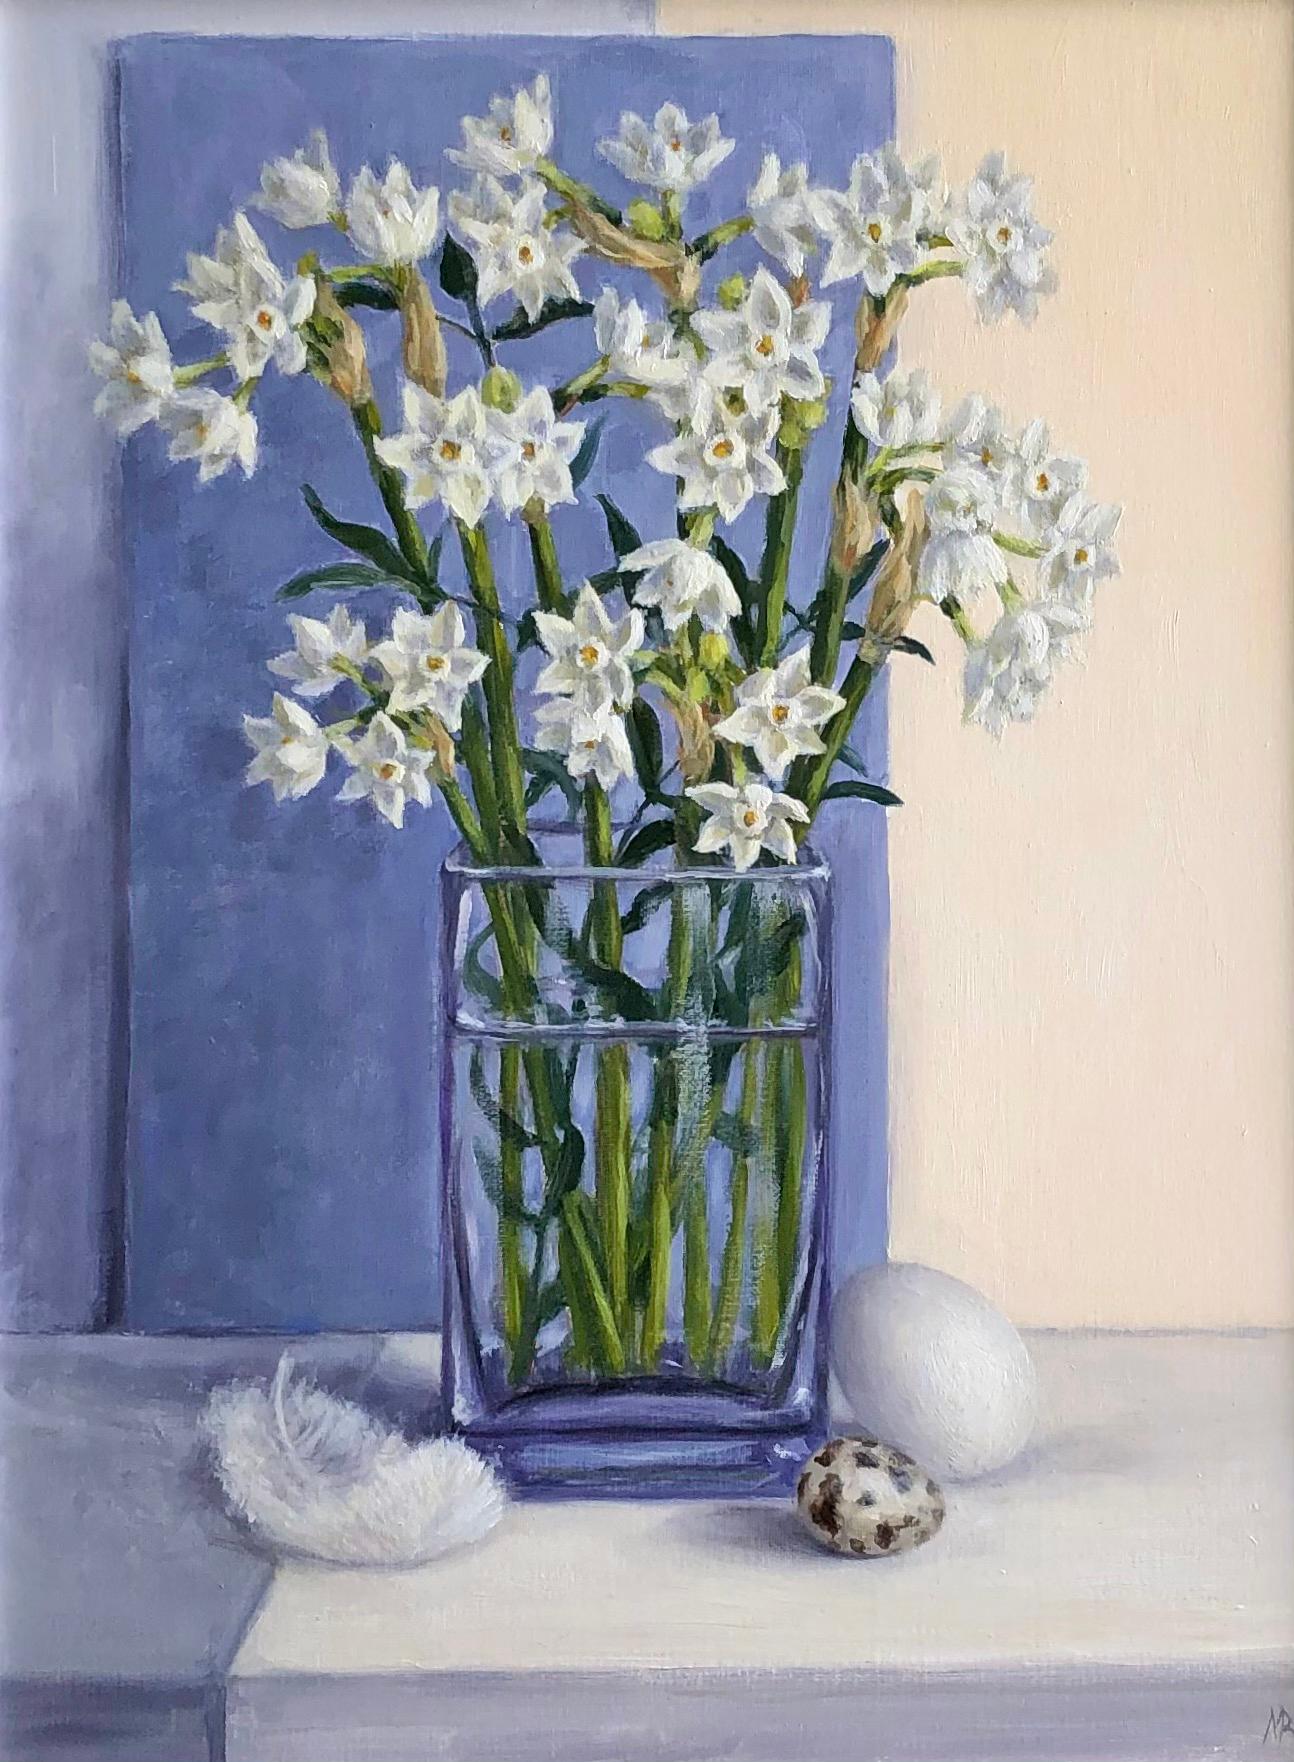 Spring Harmony and Paper Whites Diptych

Overall size cm : H106.5 x W93.5

Spring Harmony by Marie Robinson [2021]
original
Oil paint on canvas board
Image size: H:53 cm x W:53 cm
Complete Size of Unframed Work: H:40 cm x W:40 cm x D:0.5cm
Frame